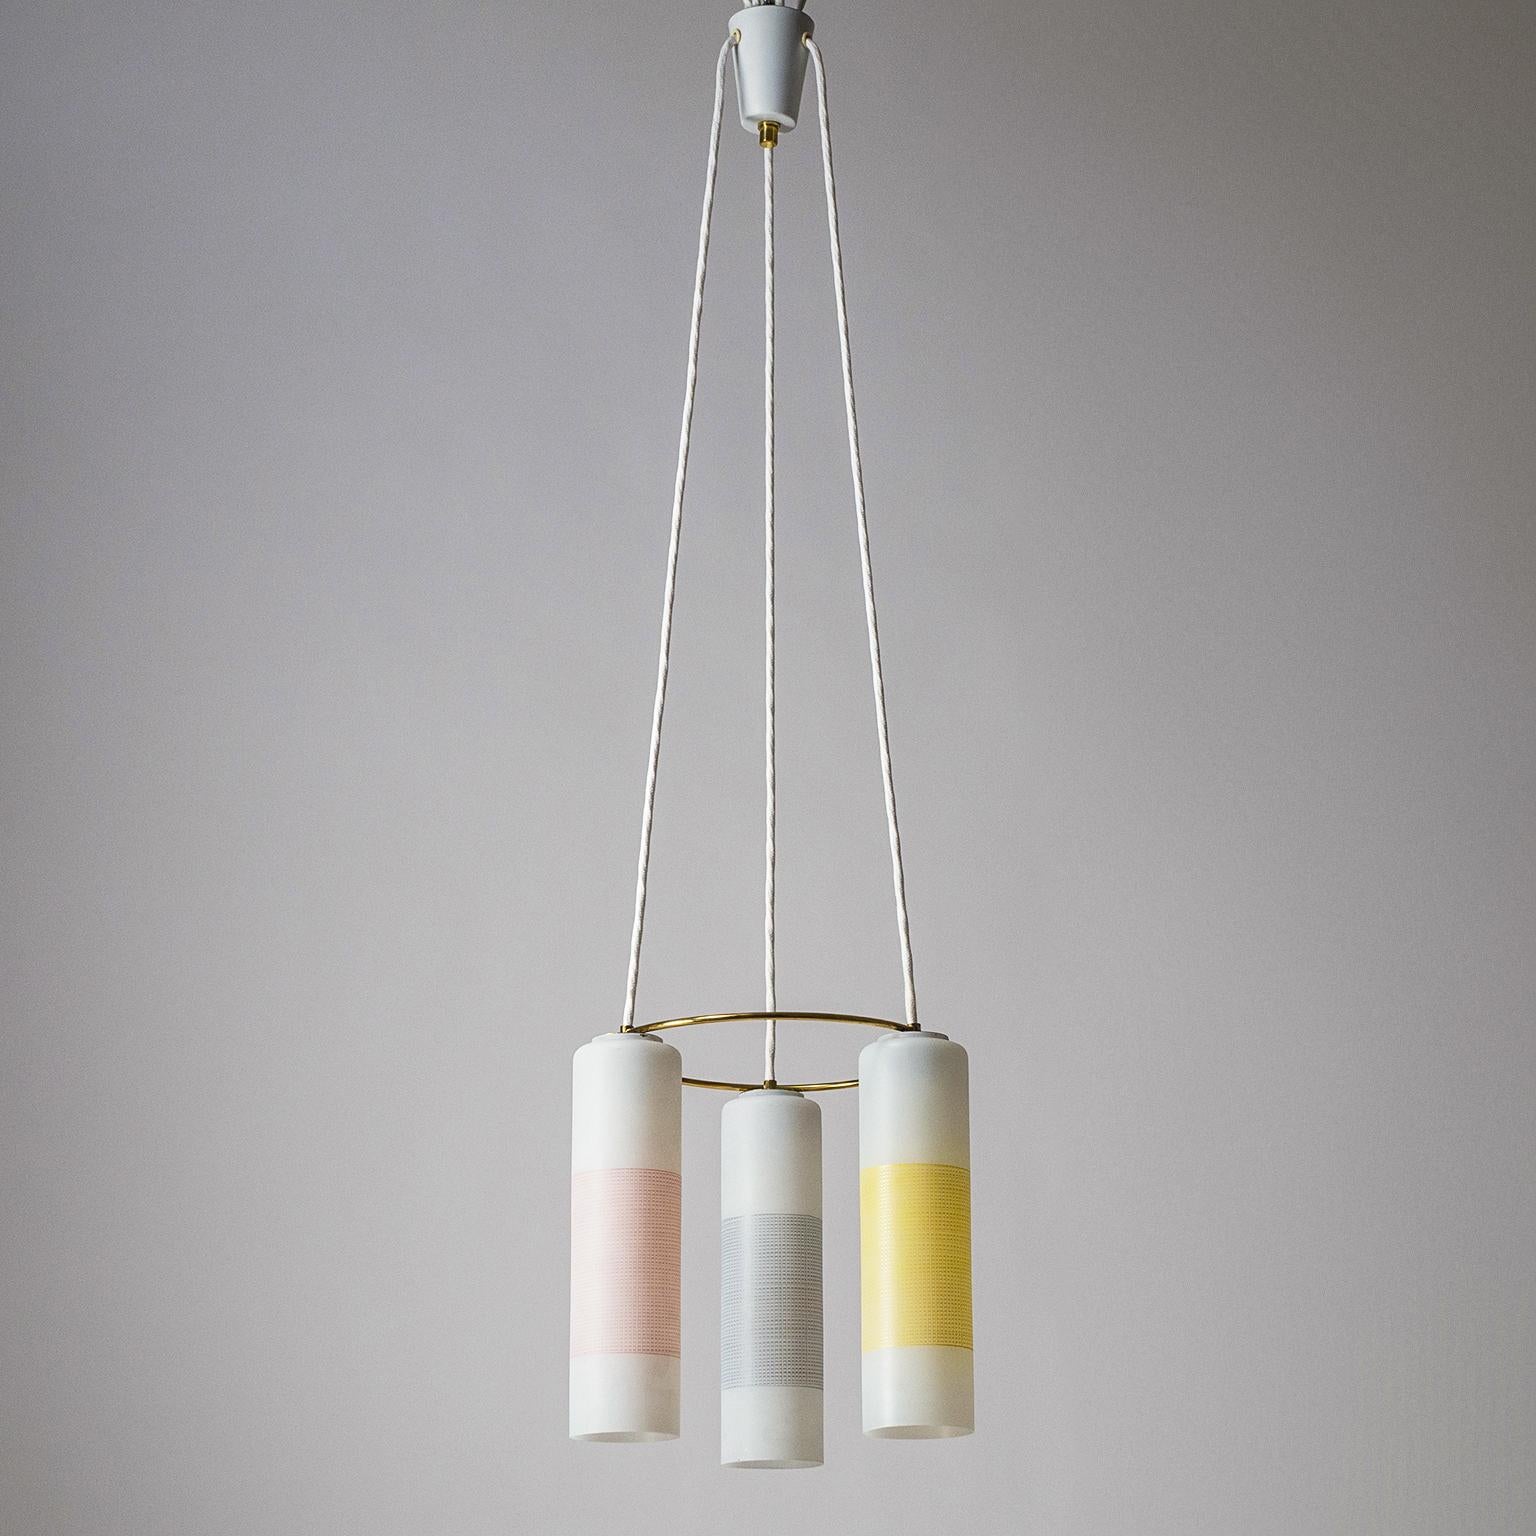 Charming midcentury enameled glass and brass chandelier by Doria Leuchten, Germany, 1960s. Three slender glass tubes enameled in white with geometric decor in pastel yellow, pink and grey. A solid brass ring holds the glasses in position. Fine